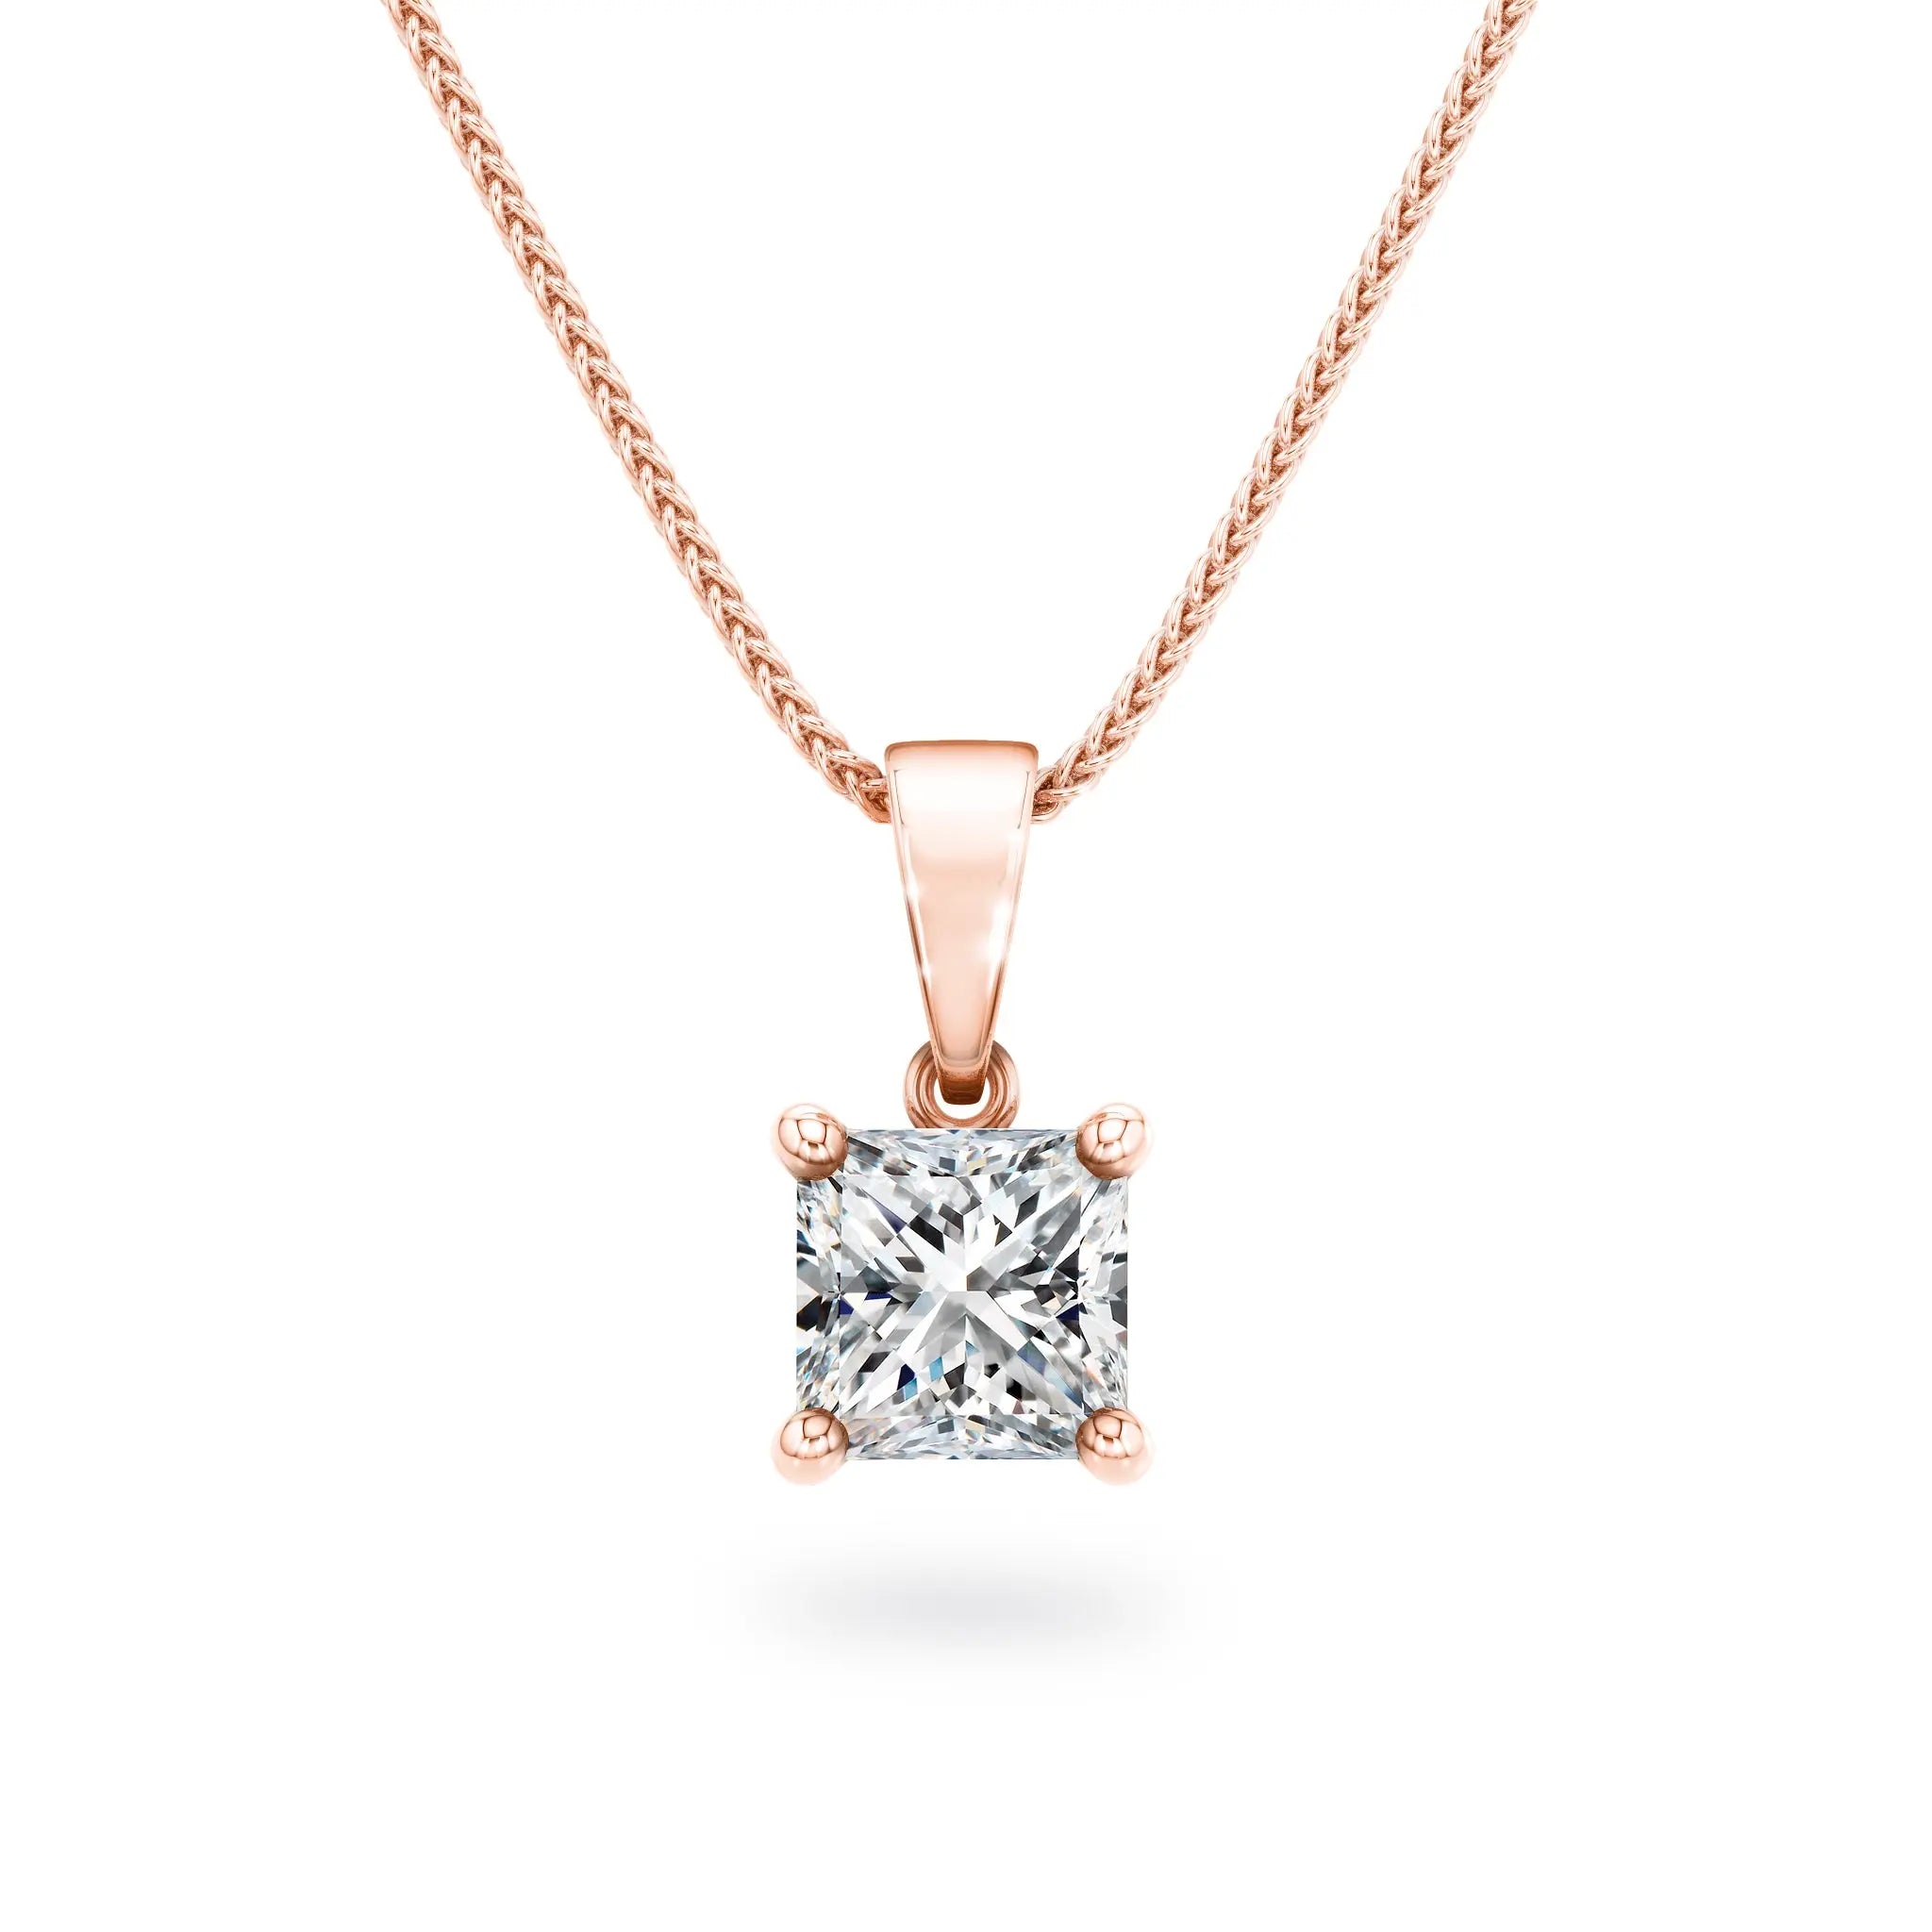 Shimansky - My Girl Solitaire Diamond Pendant 0.50ct Crafted in 18K Rose Gold